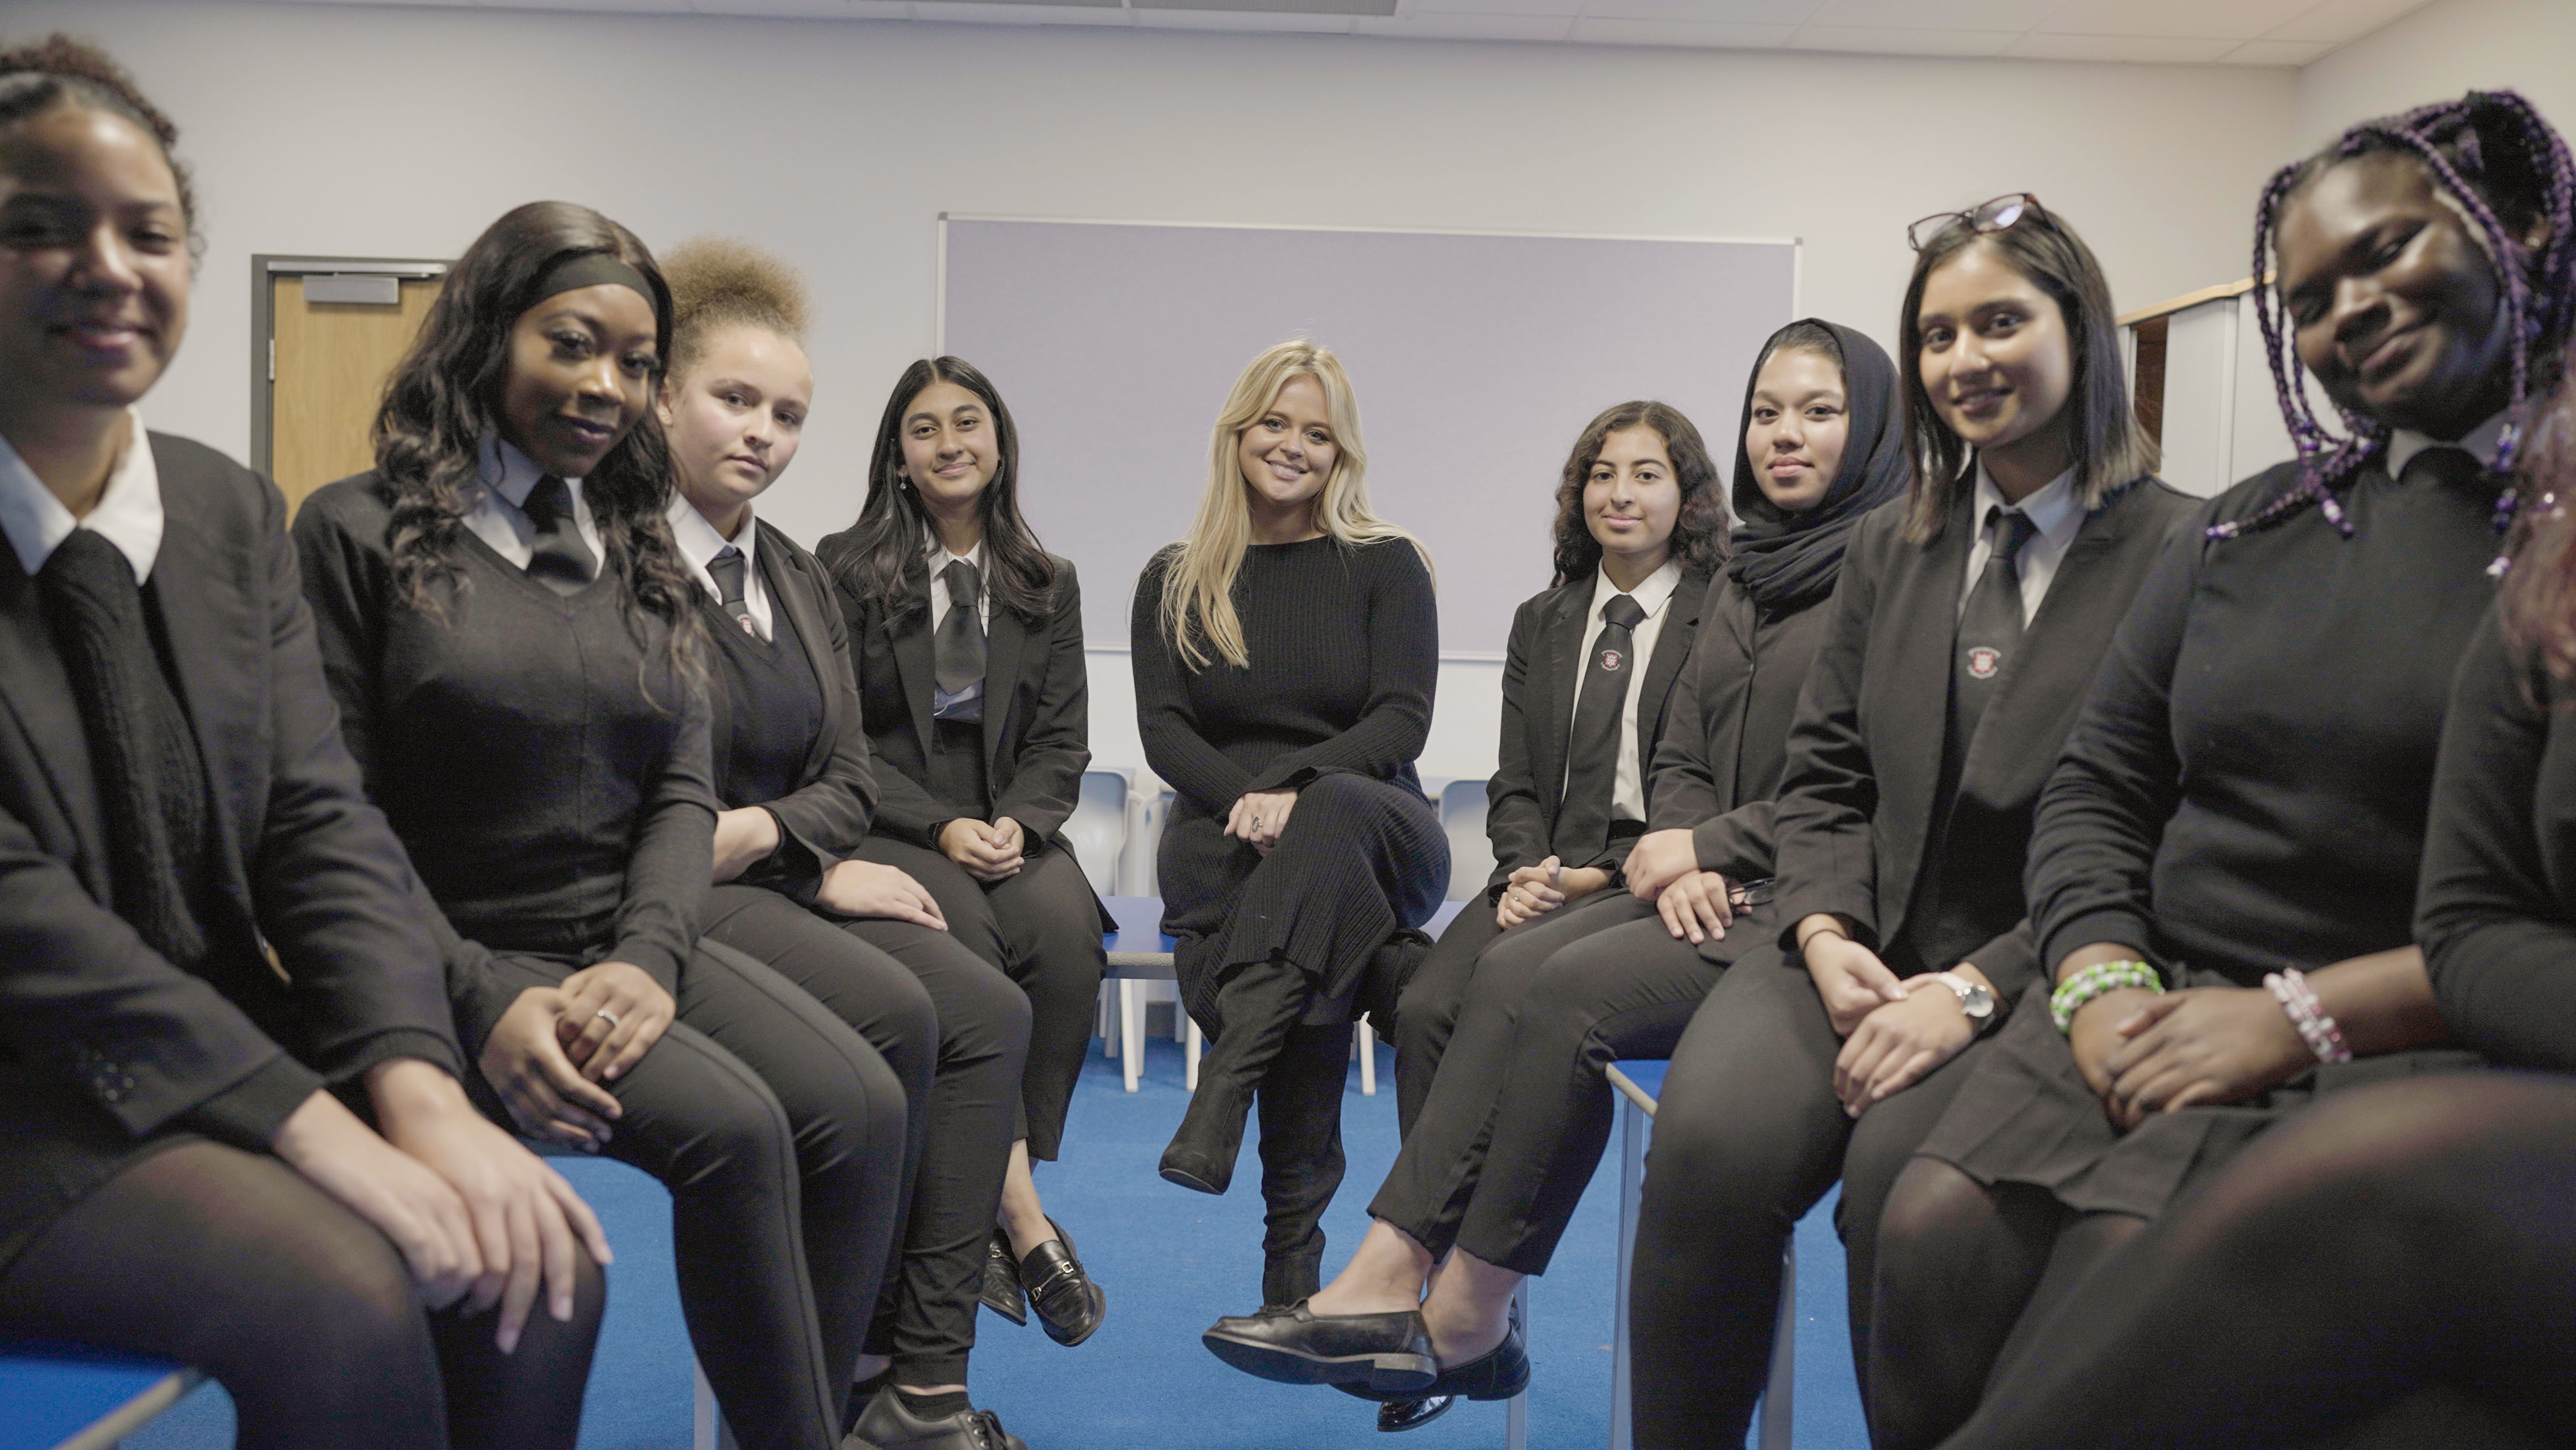 Emily Atack talking to school girls in the documentary (BBC/Little Gem Productions)